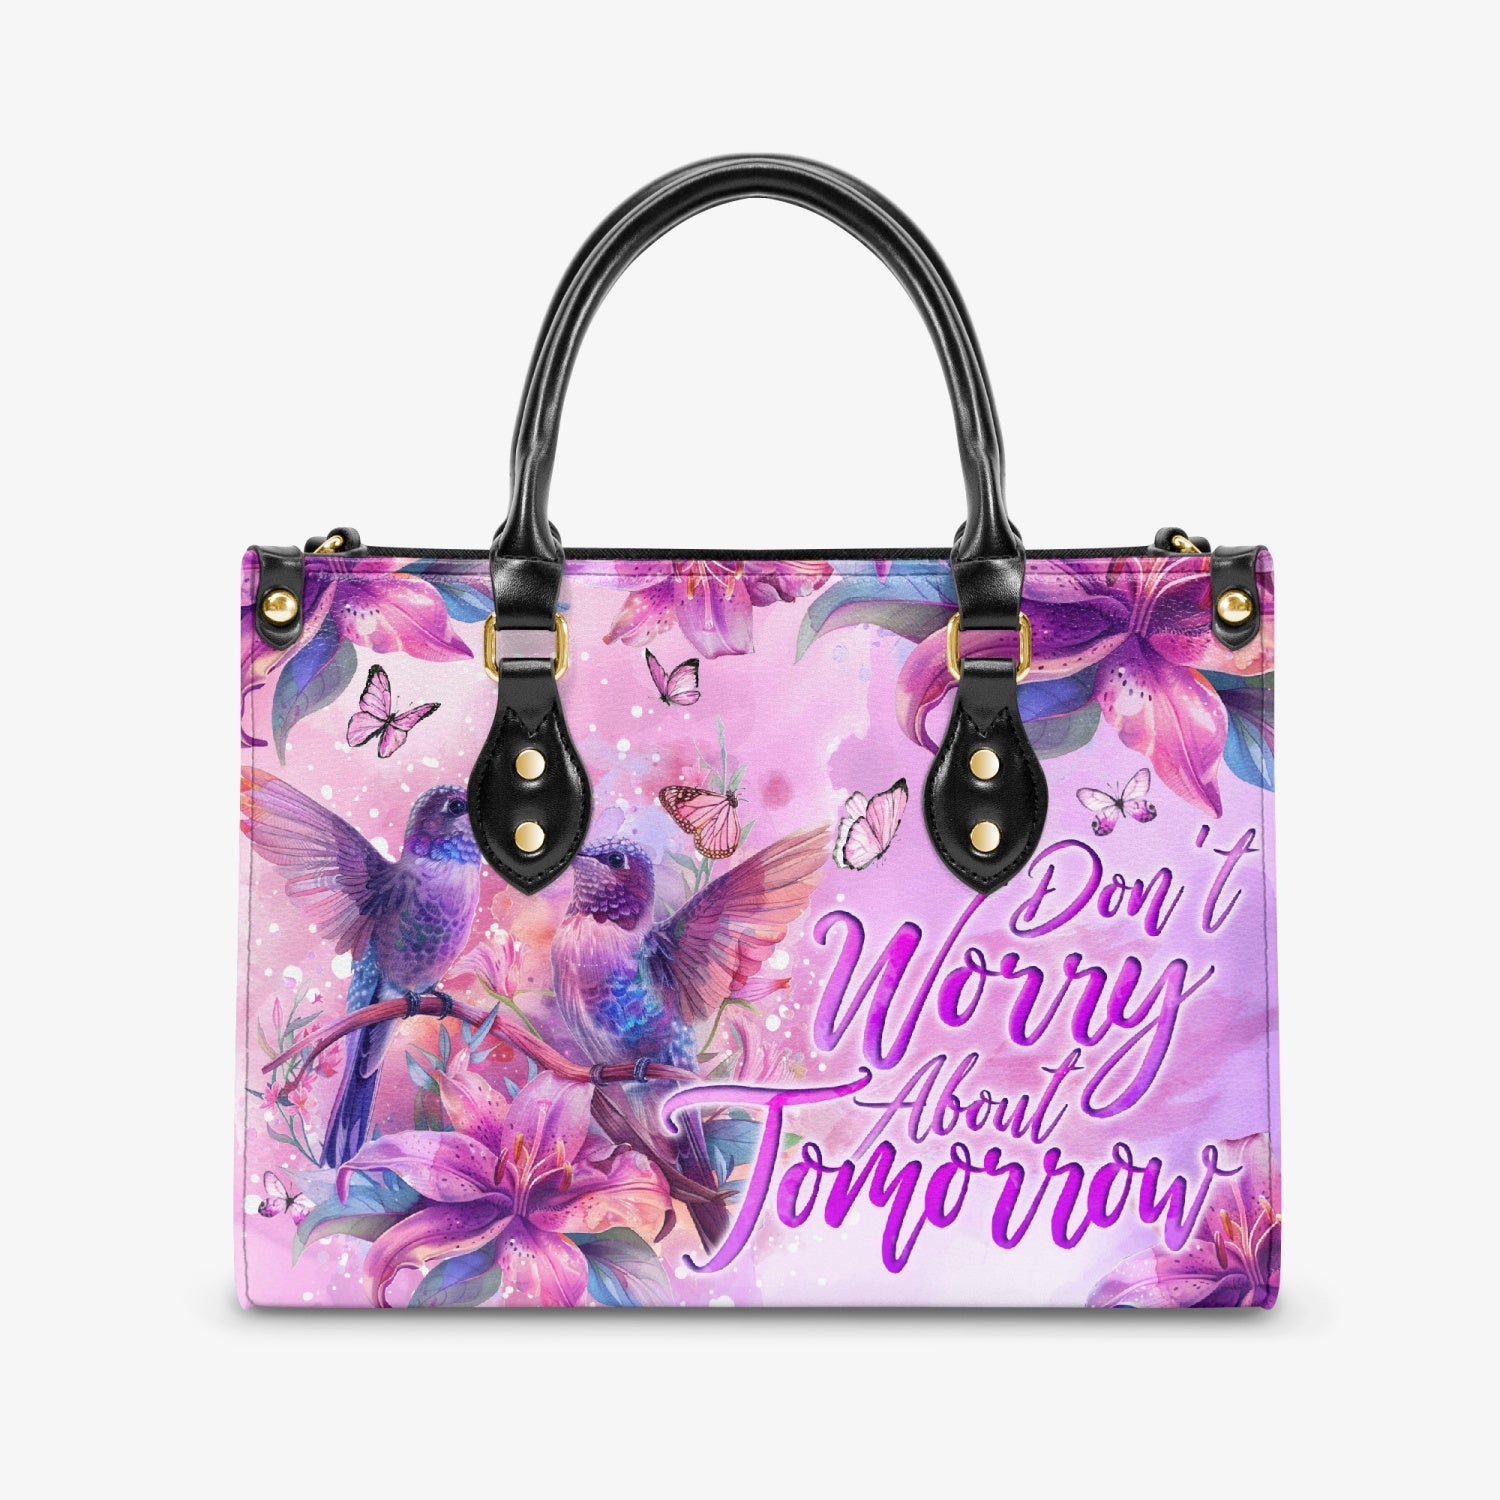 Don't Worry About Tomorrow Leather Handbag - Tyqy0404241